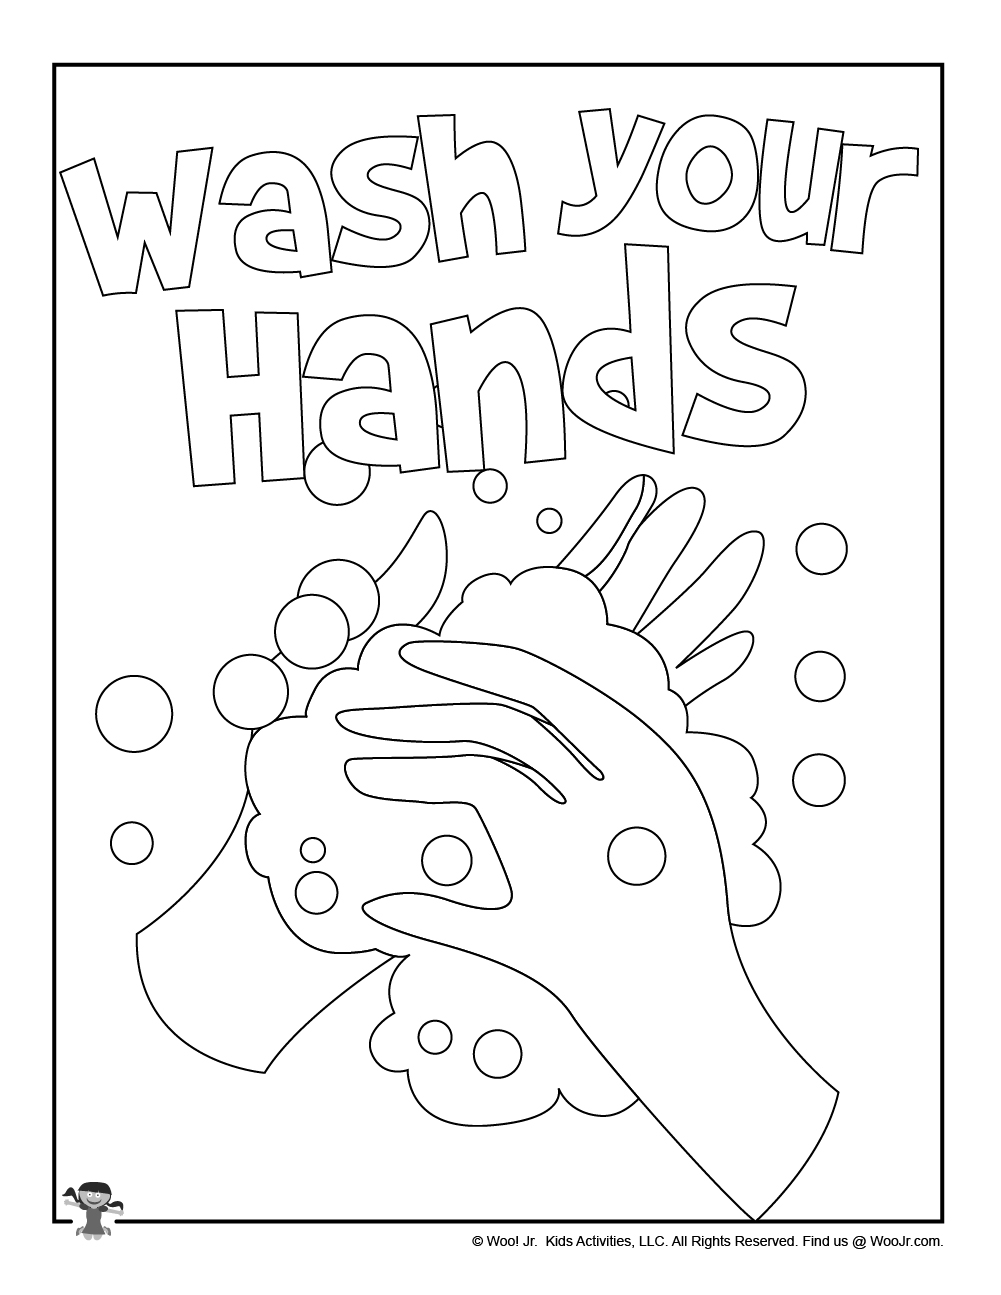 Student Coloring Page Wash Your Hands | Woo! Jr. Kids Activities